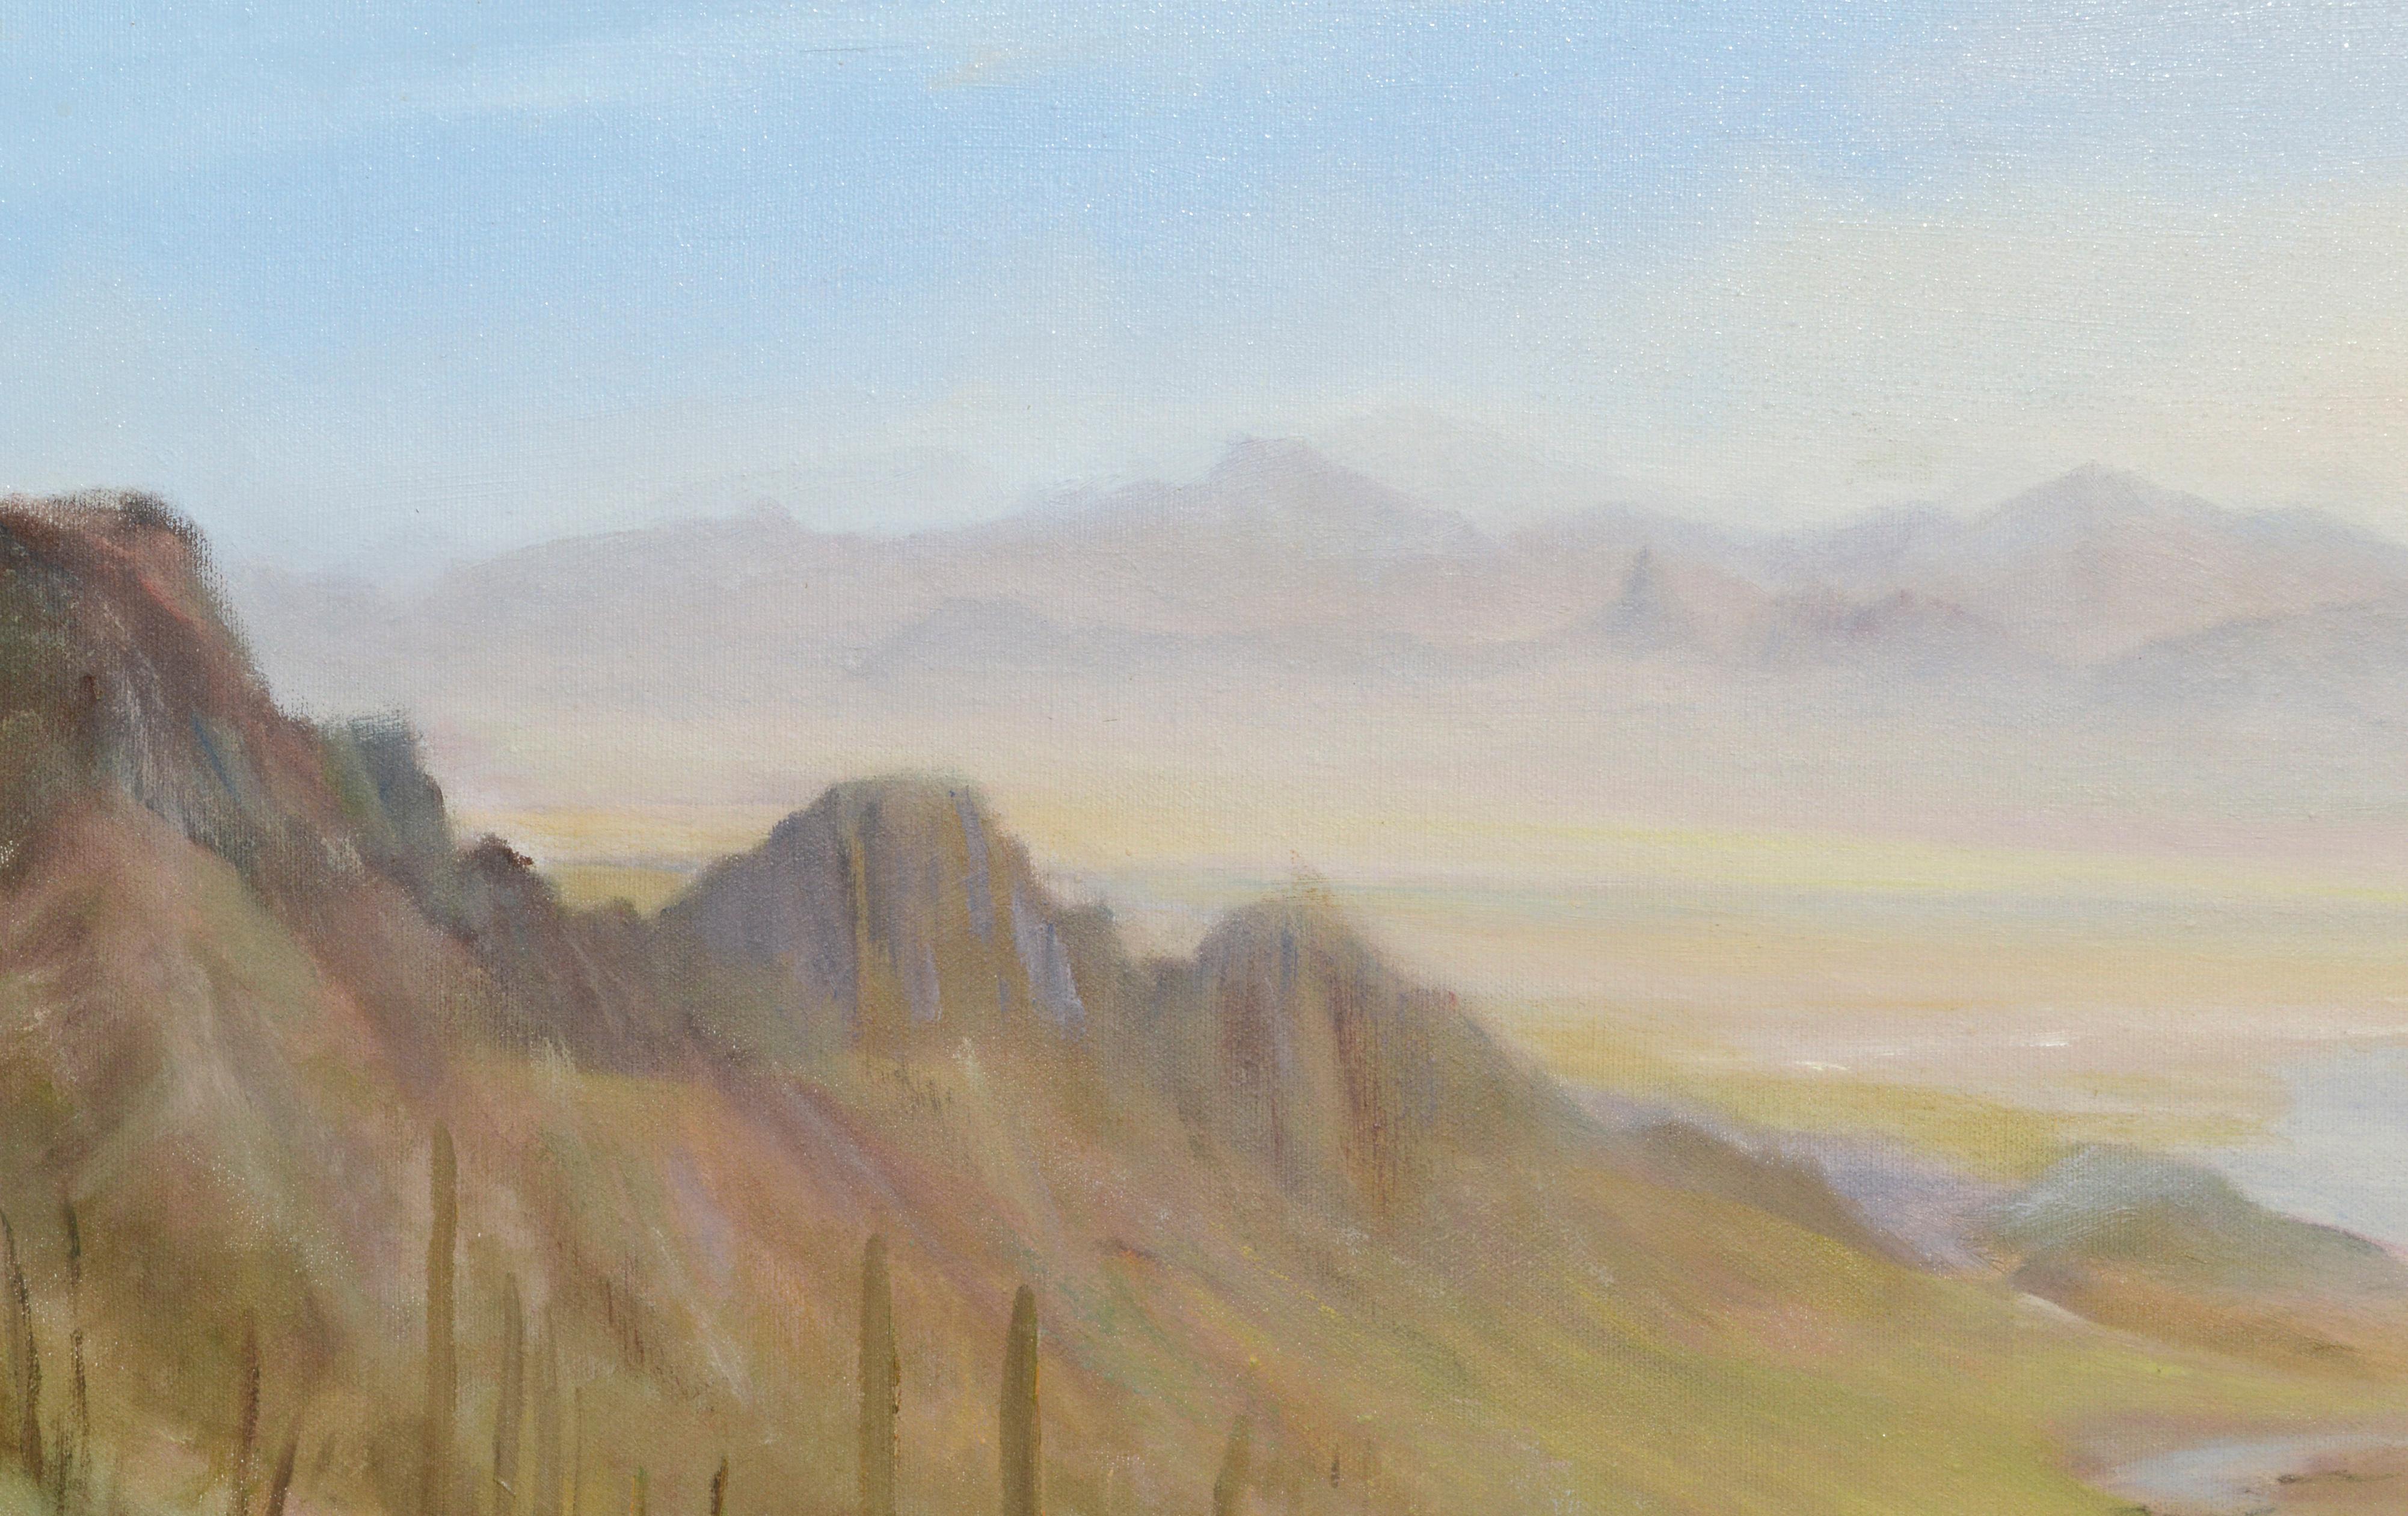 Arizona Valley Desert Landscape with Saguaro Cactus  - American Impressionist Painting by Kenneth Lucas